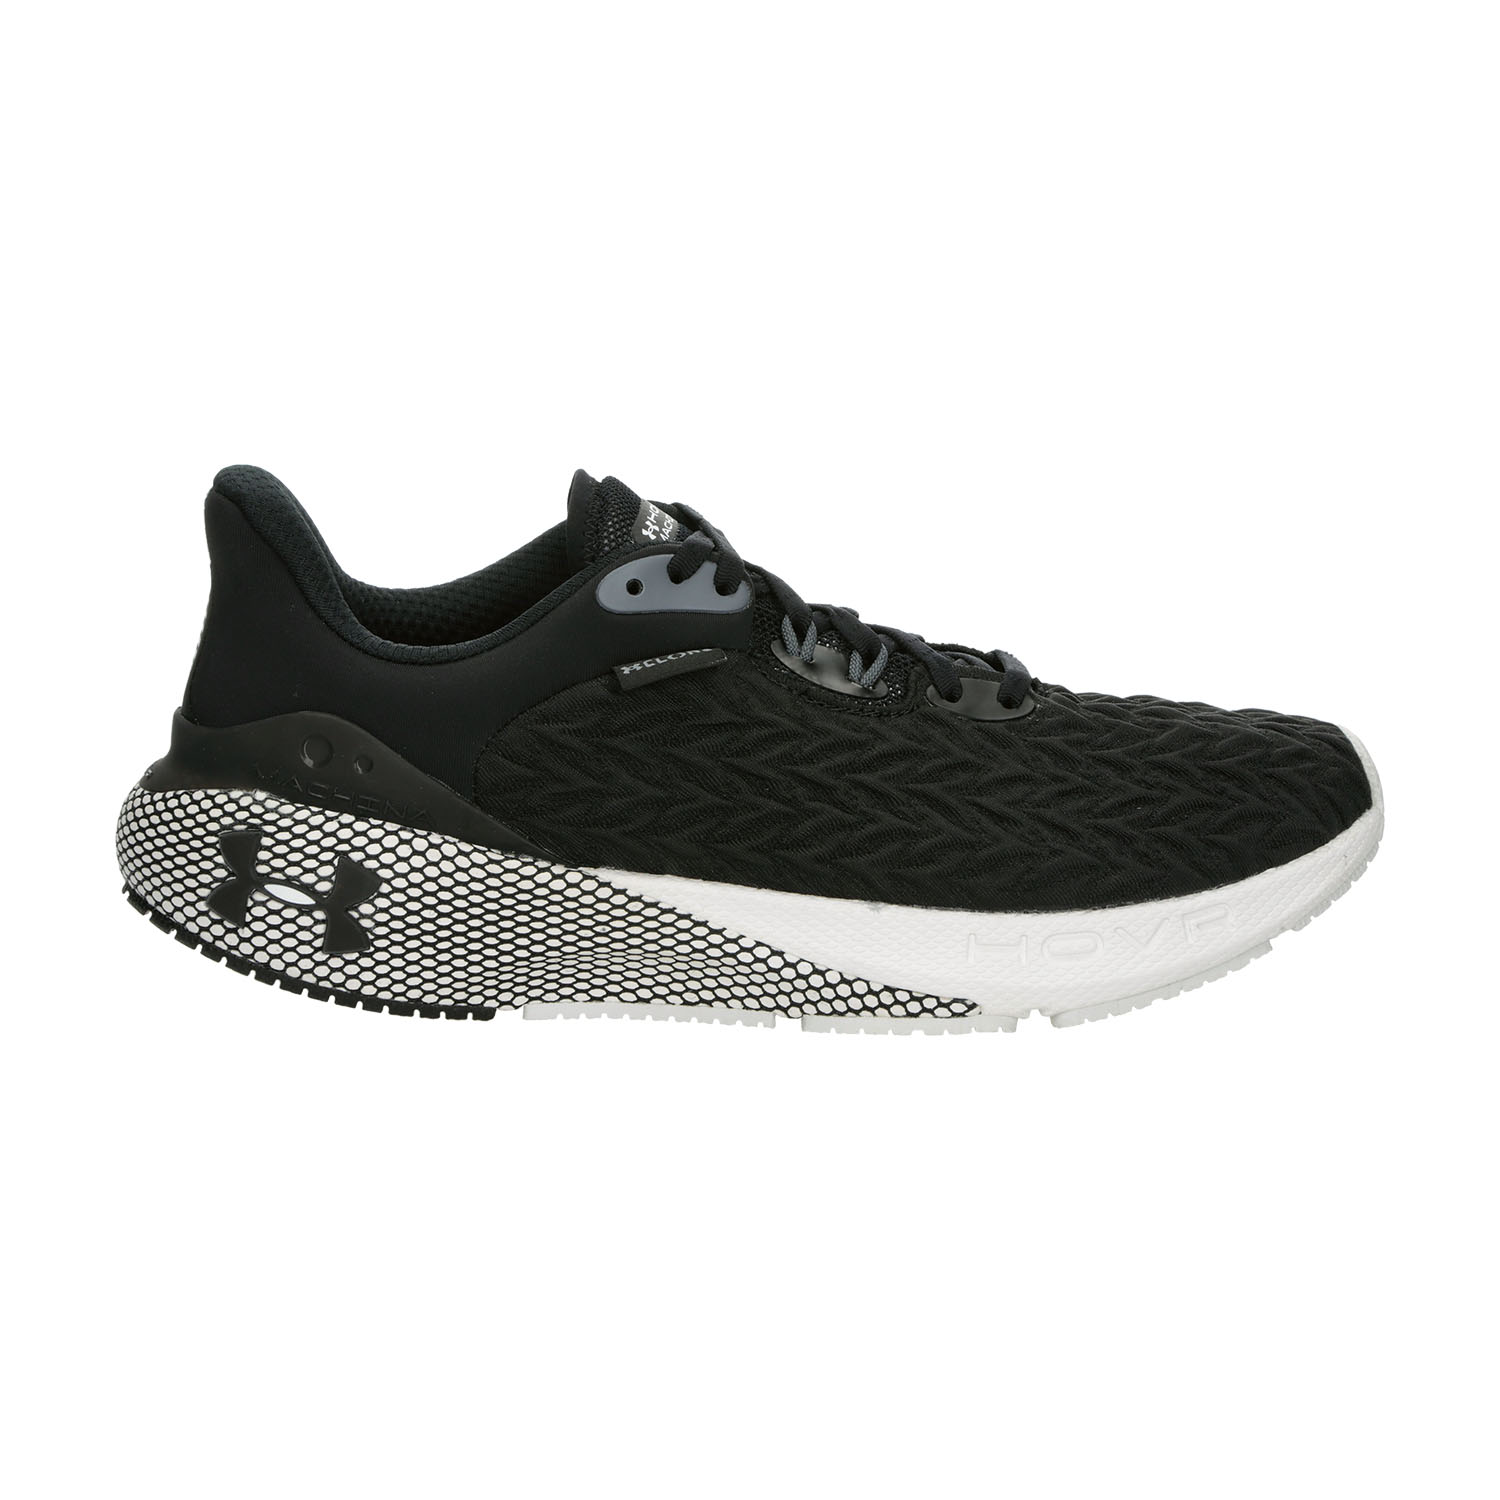 Under Armour HOVR Machina 3 Clone Men's Running Shoes - Black